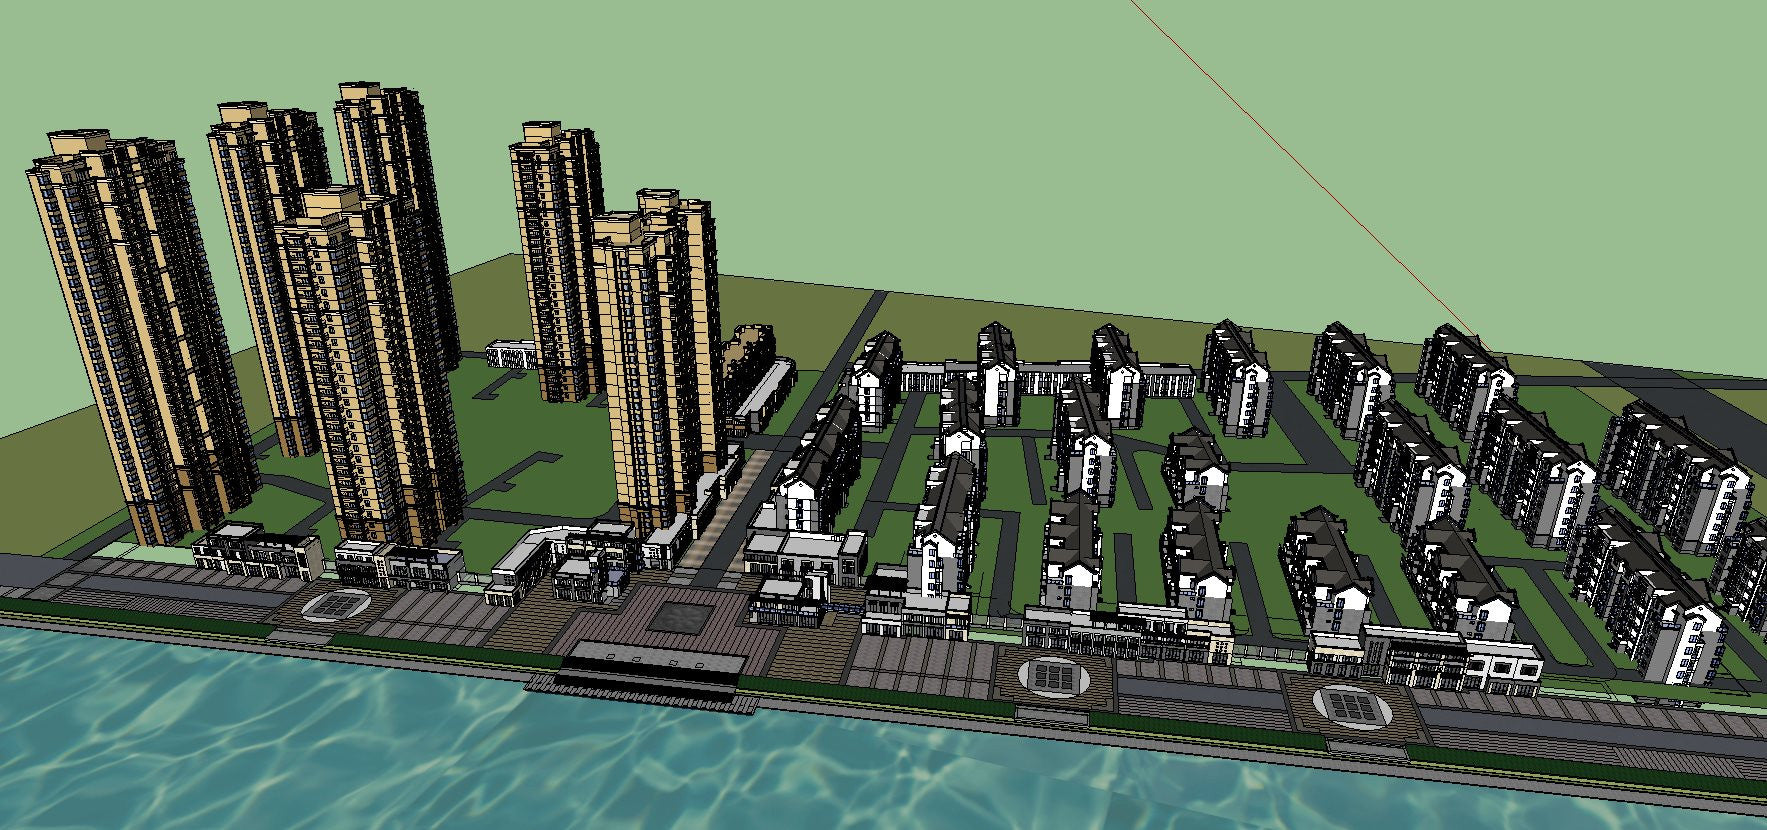 【10 Large-Scale Residential Construction and Landscape Sketchup Models】